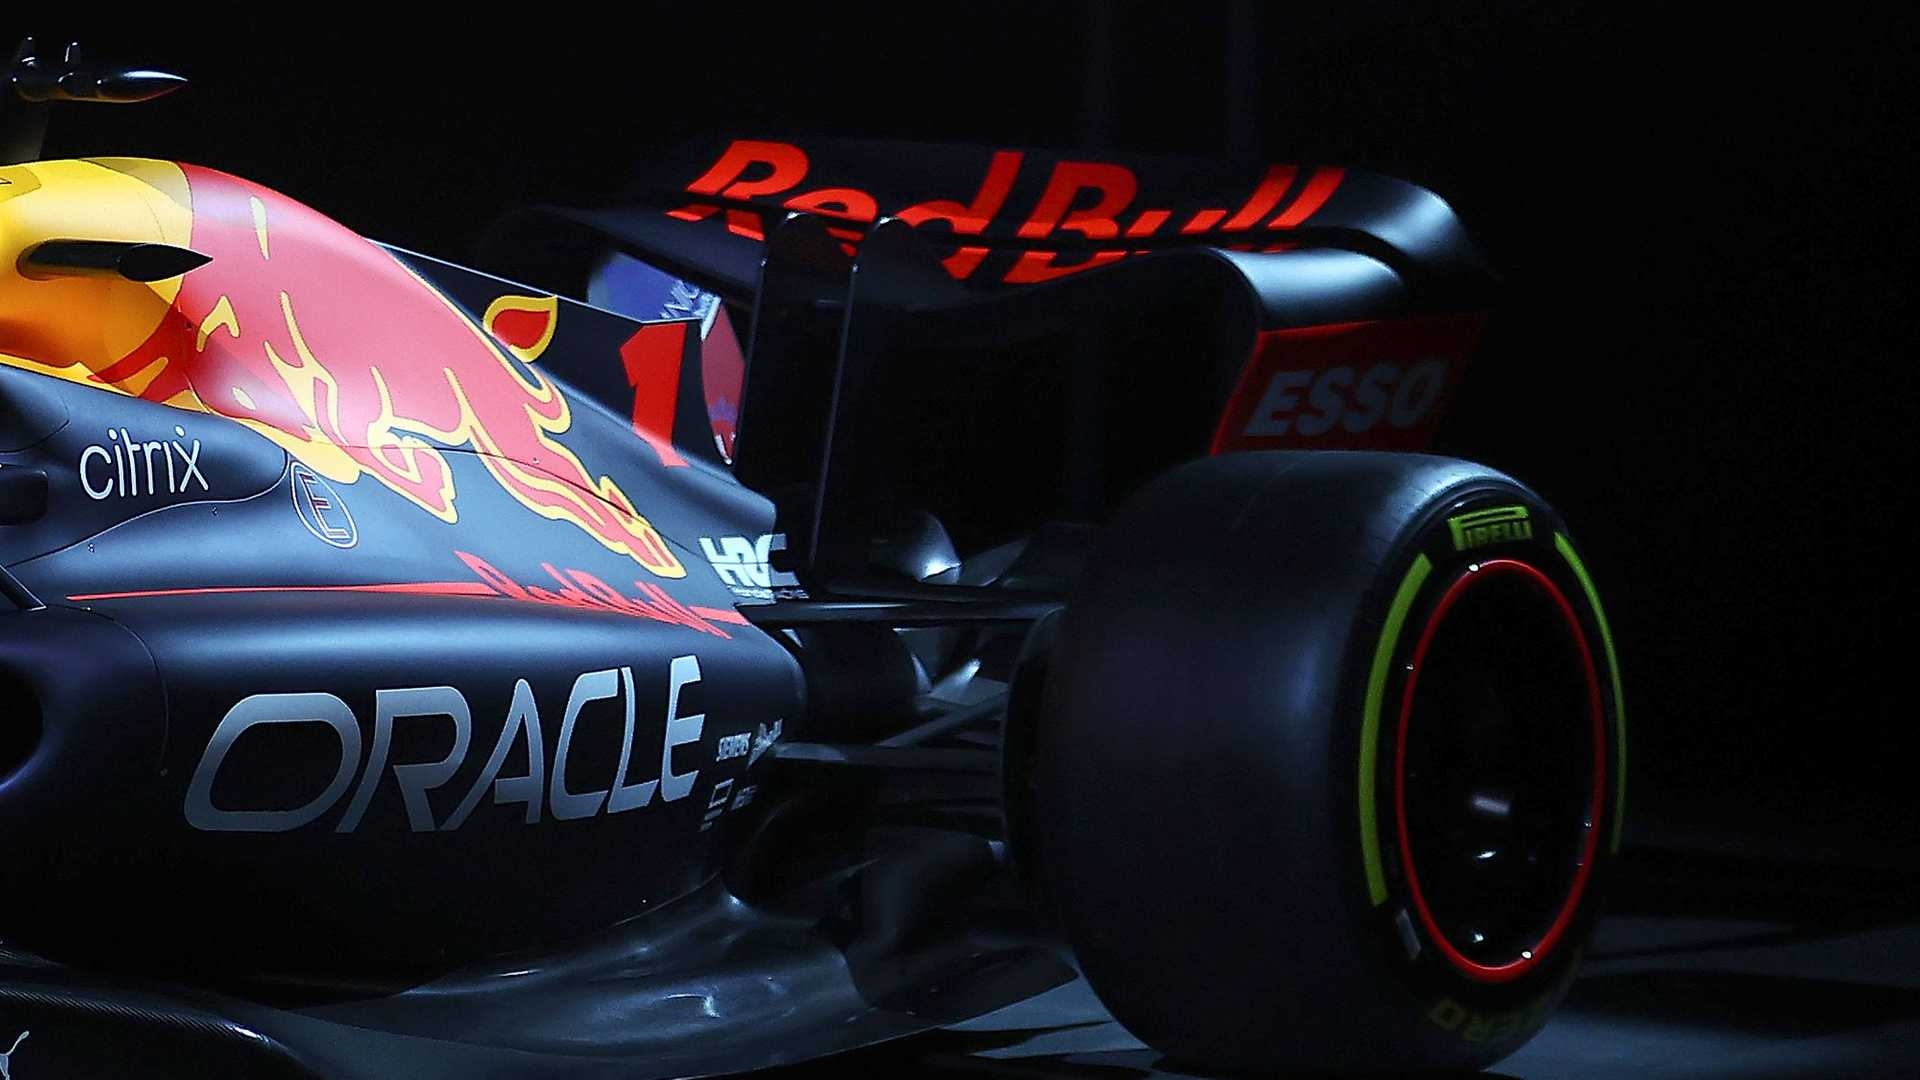 Red Bull Racing, 2022 F1 livery, RB18 show car launch, Special livery, 1920x1080 Full HD Desktop